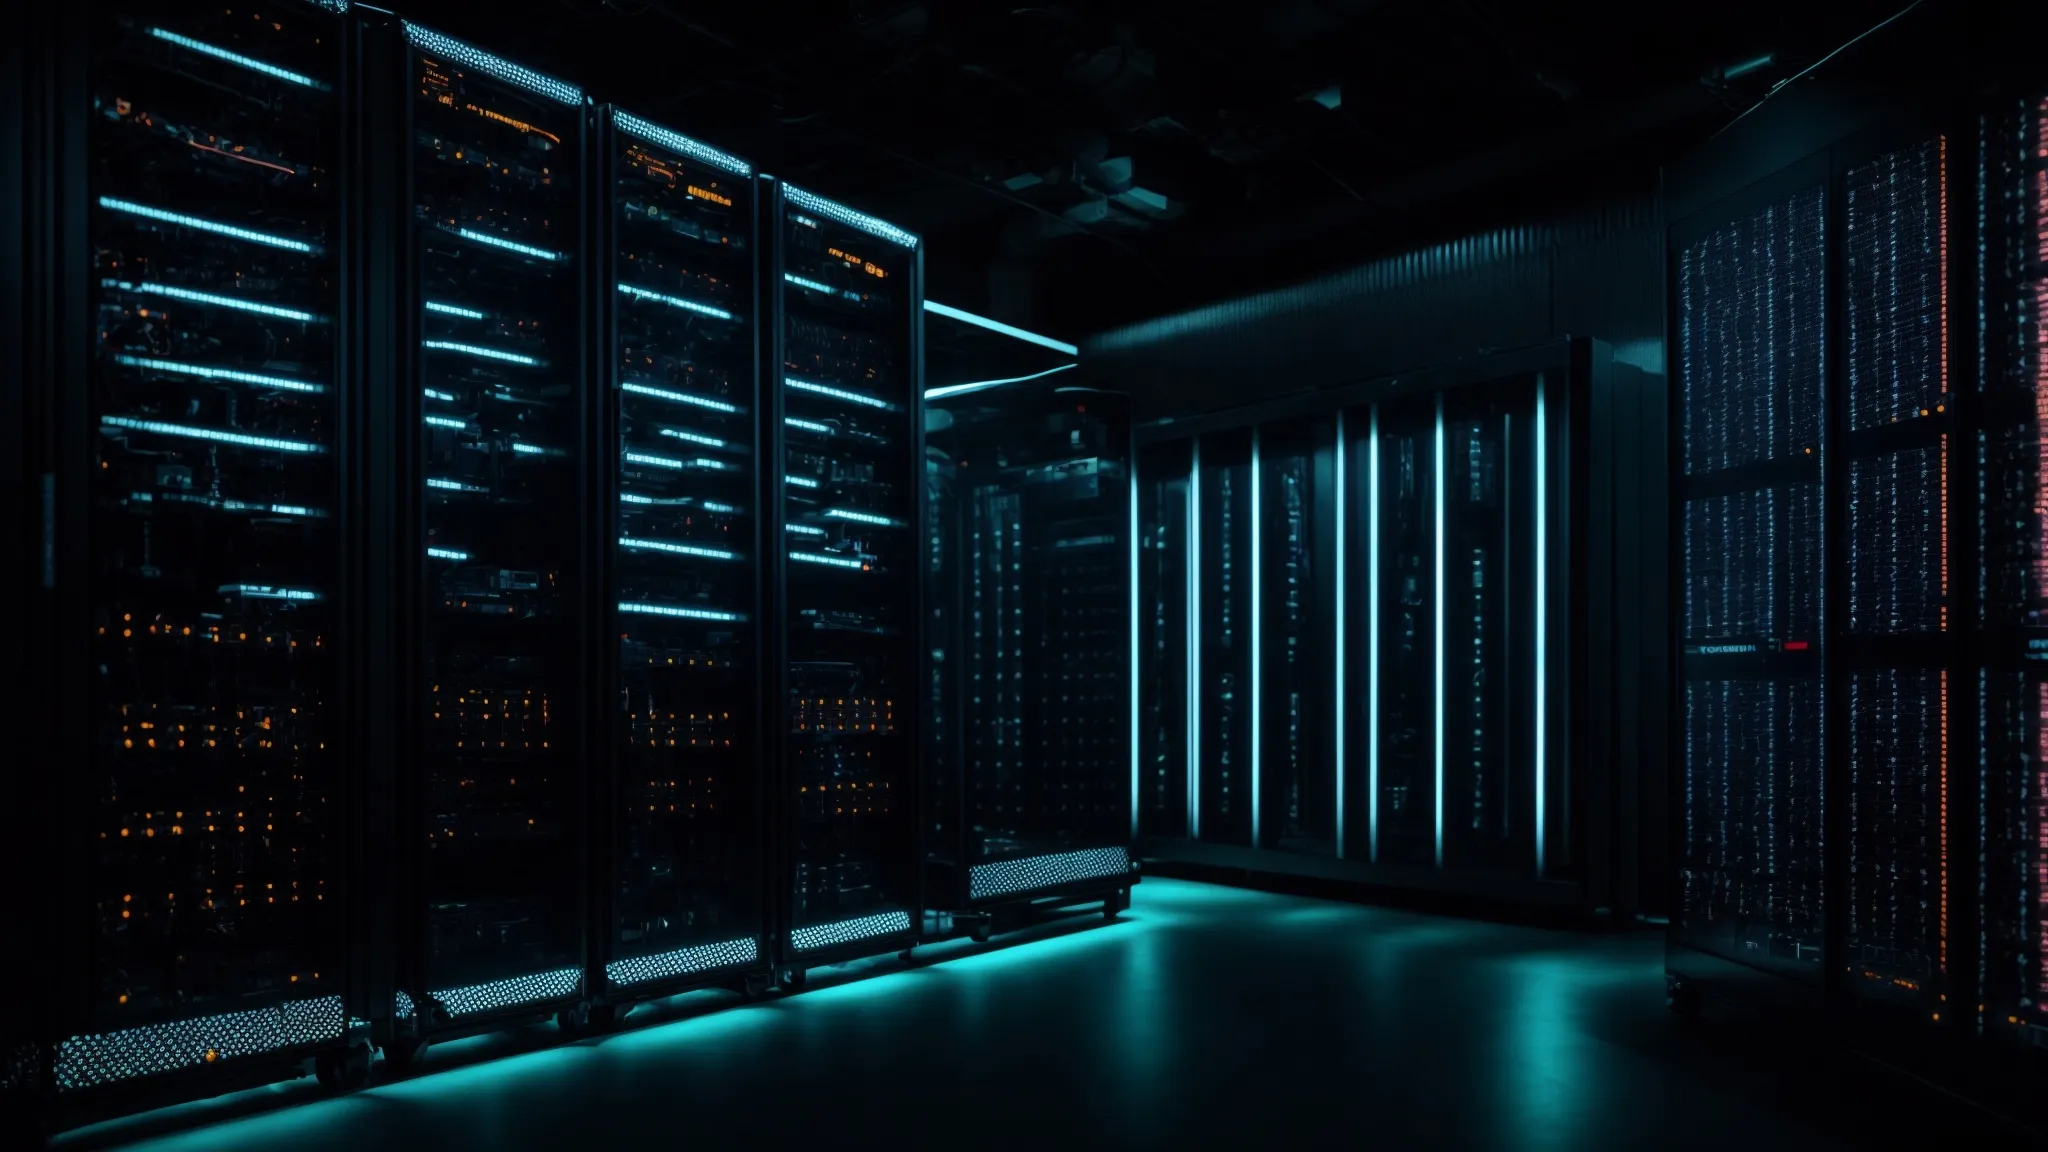 a web server rack glowing with lights in a dark data center room, signifying technological power behind websites and search optimization.